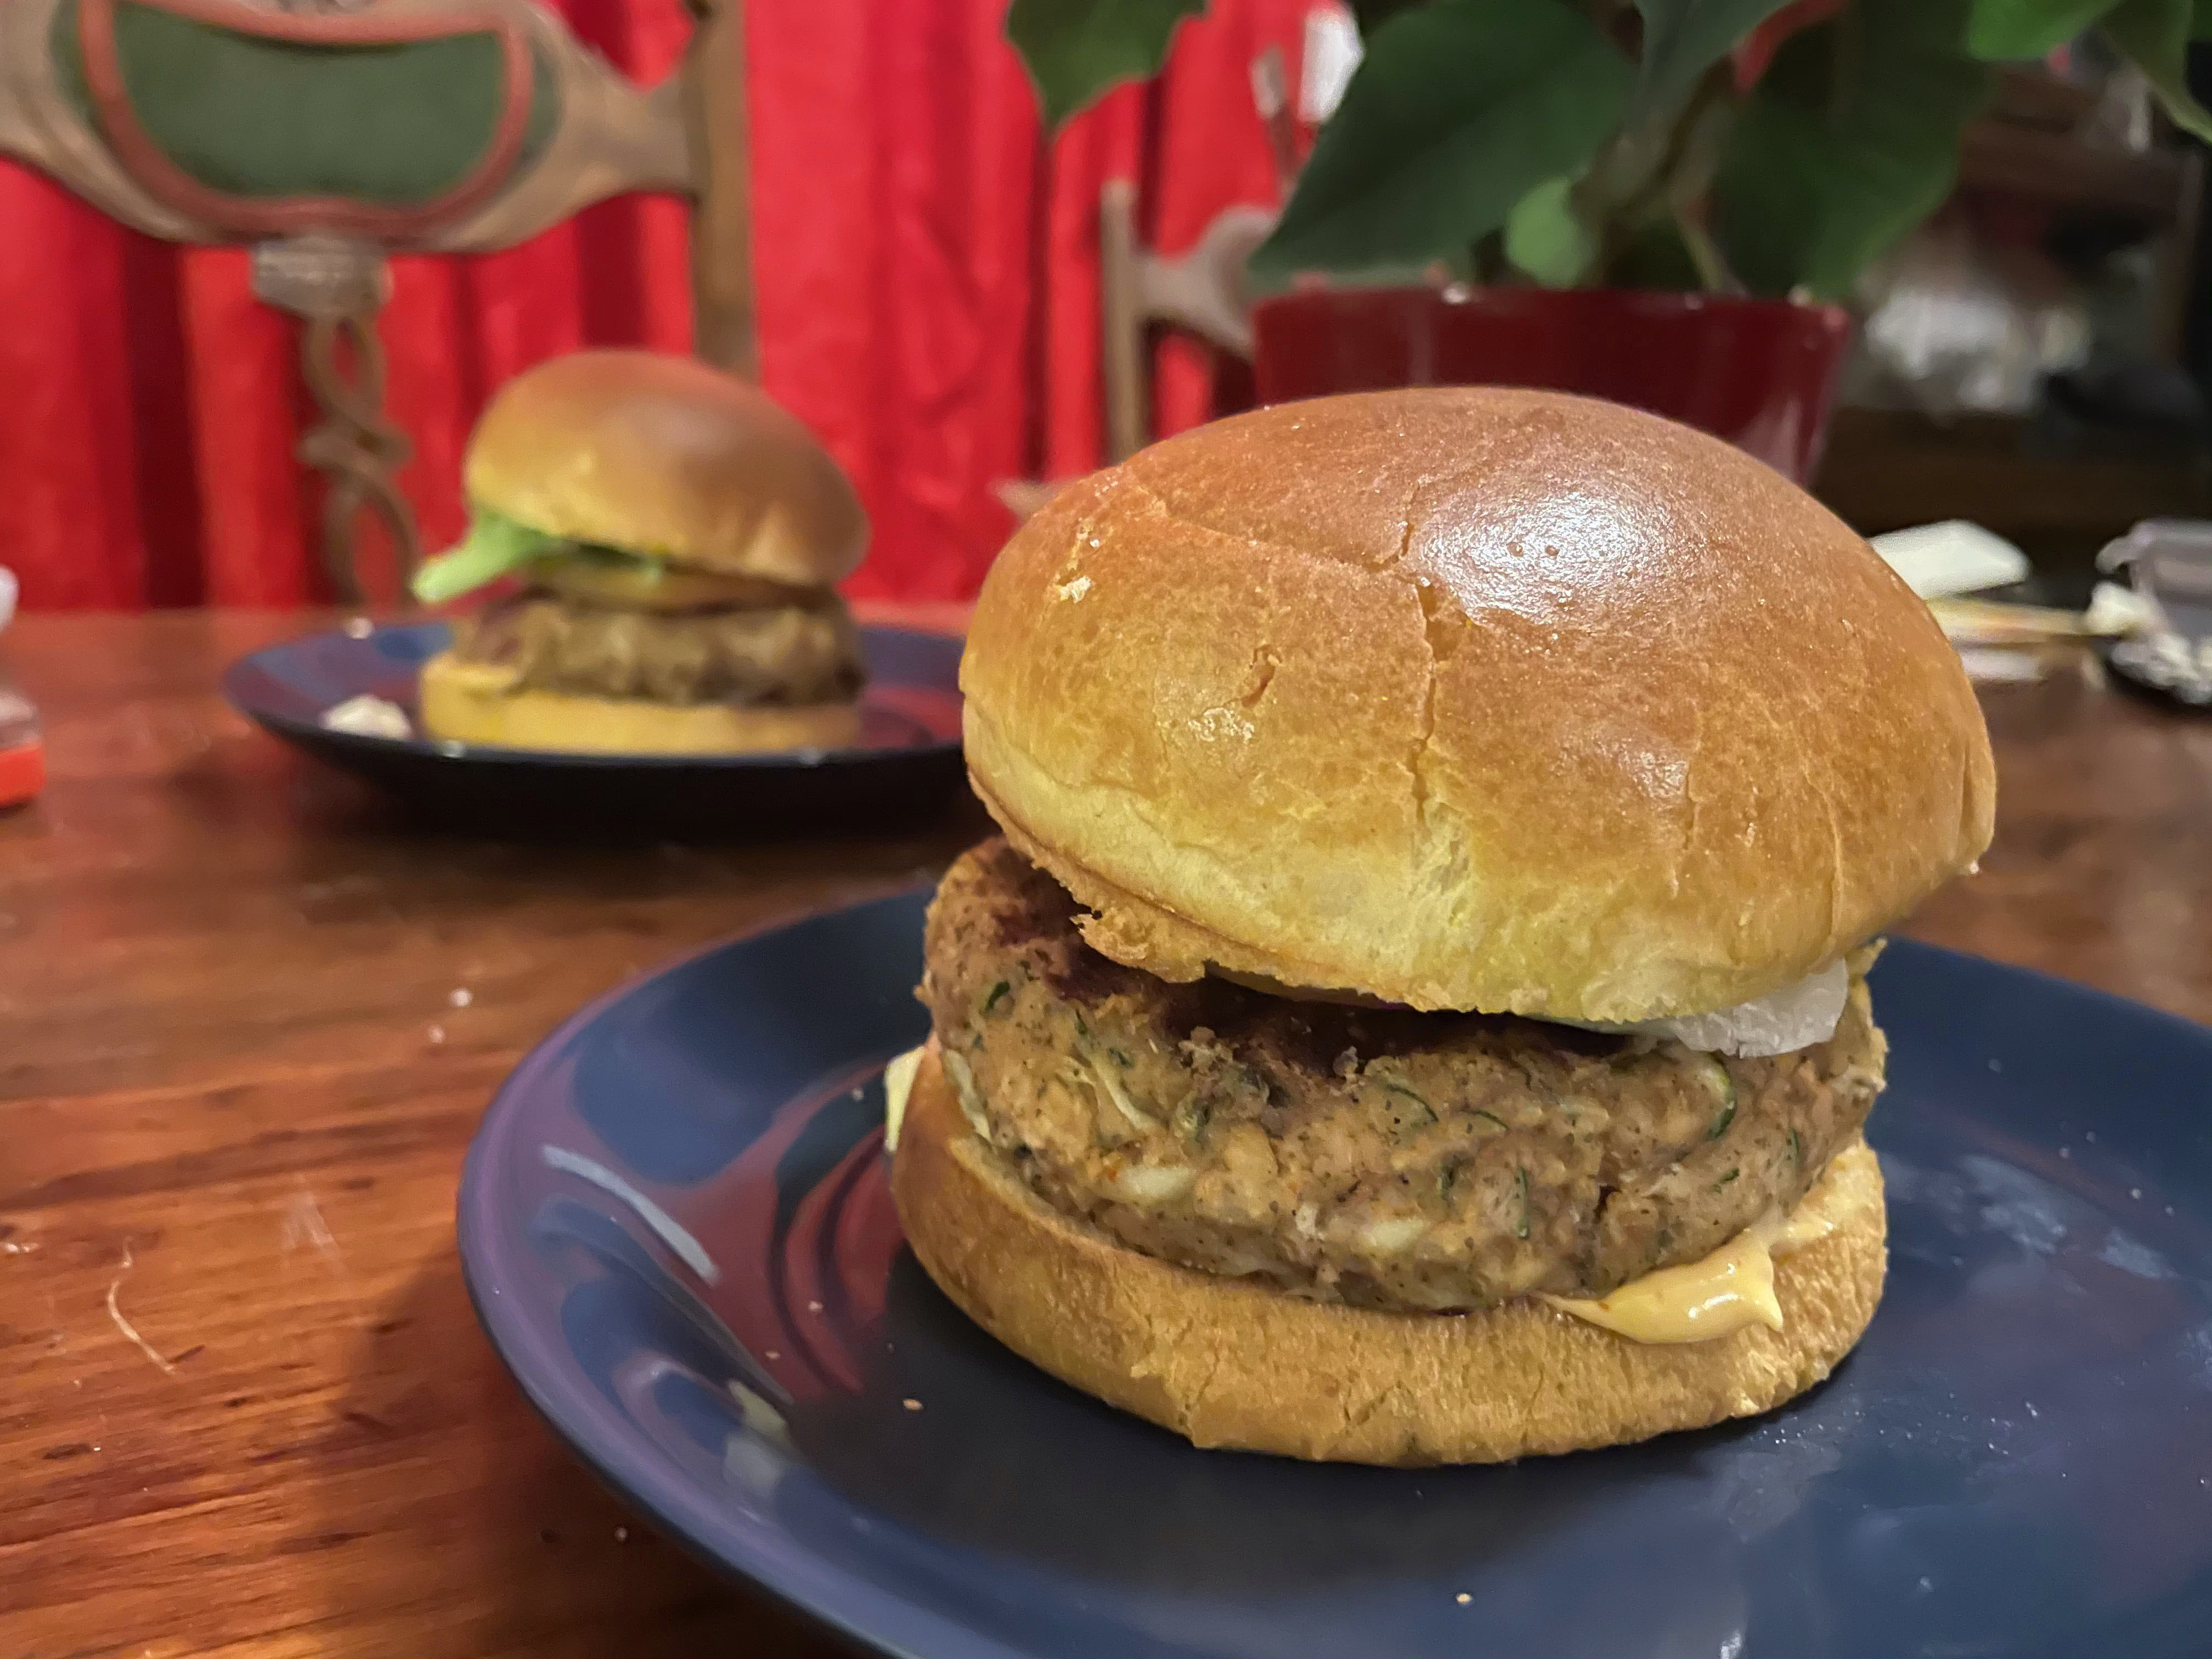 Sugar, Spice and Everything Nice: Vegan and Gluten-Free Burgers